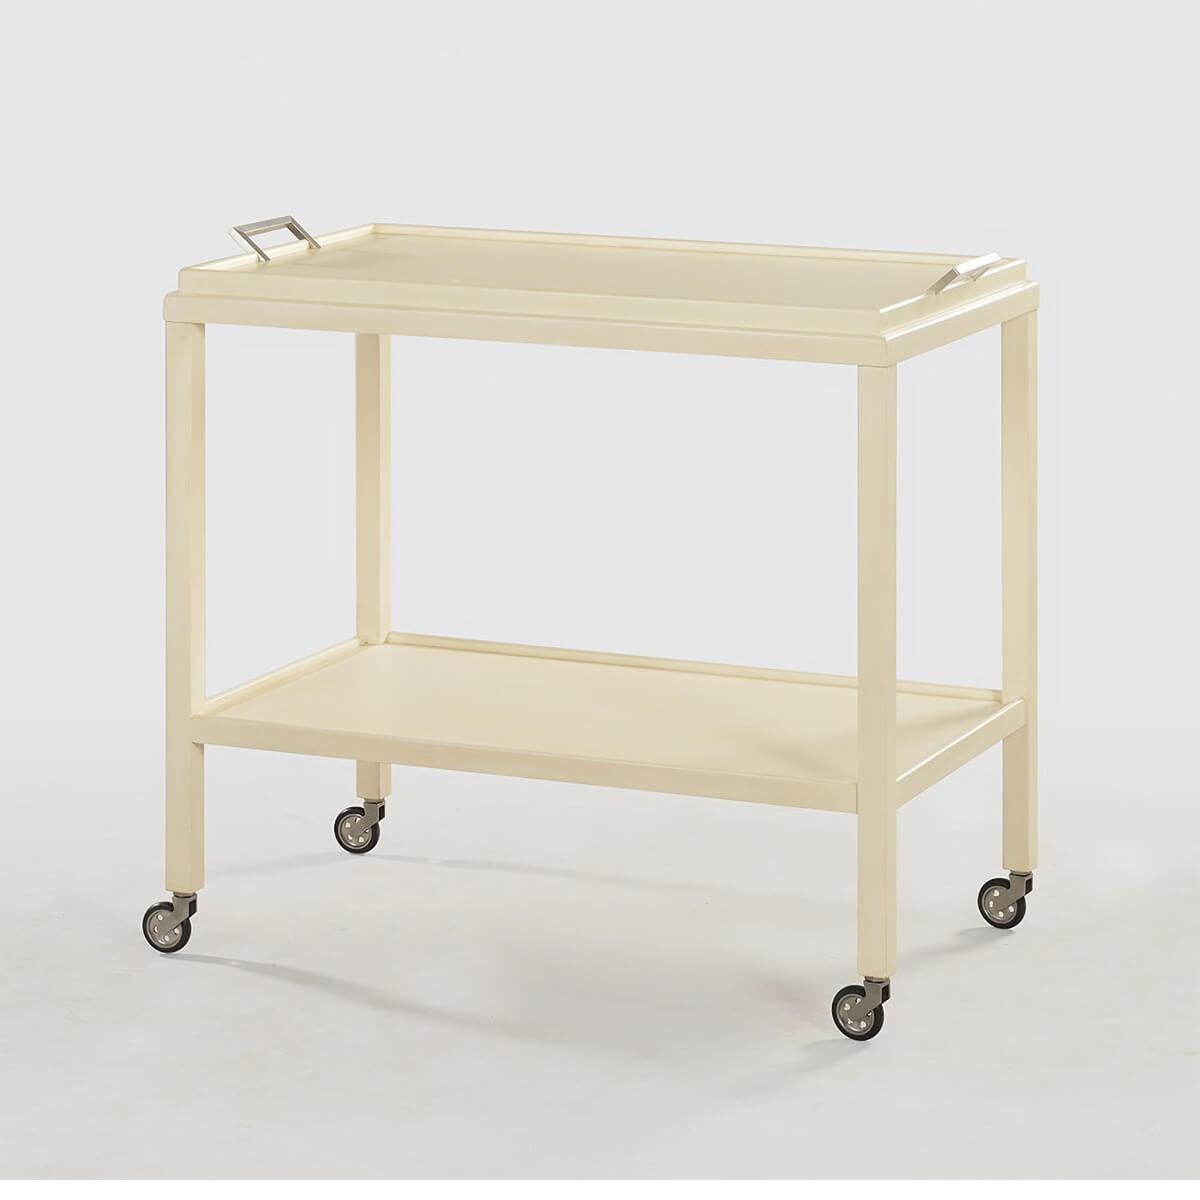 Mid-Century Modern bar cart with removable tray and shelf has hand-cast brass hardware and brass wheels with floor protective tread and a “coconut” painted finish with slight glazing on acacia veneer and acacia solids.

Dimensions: 33